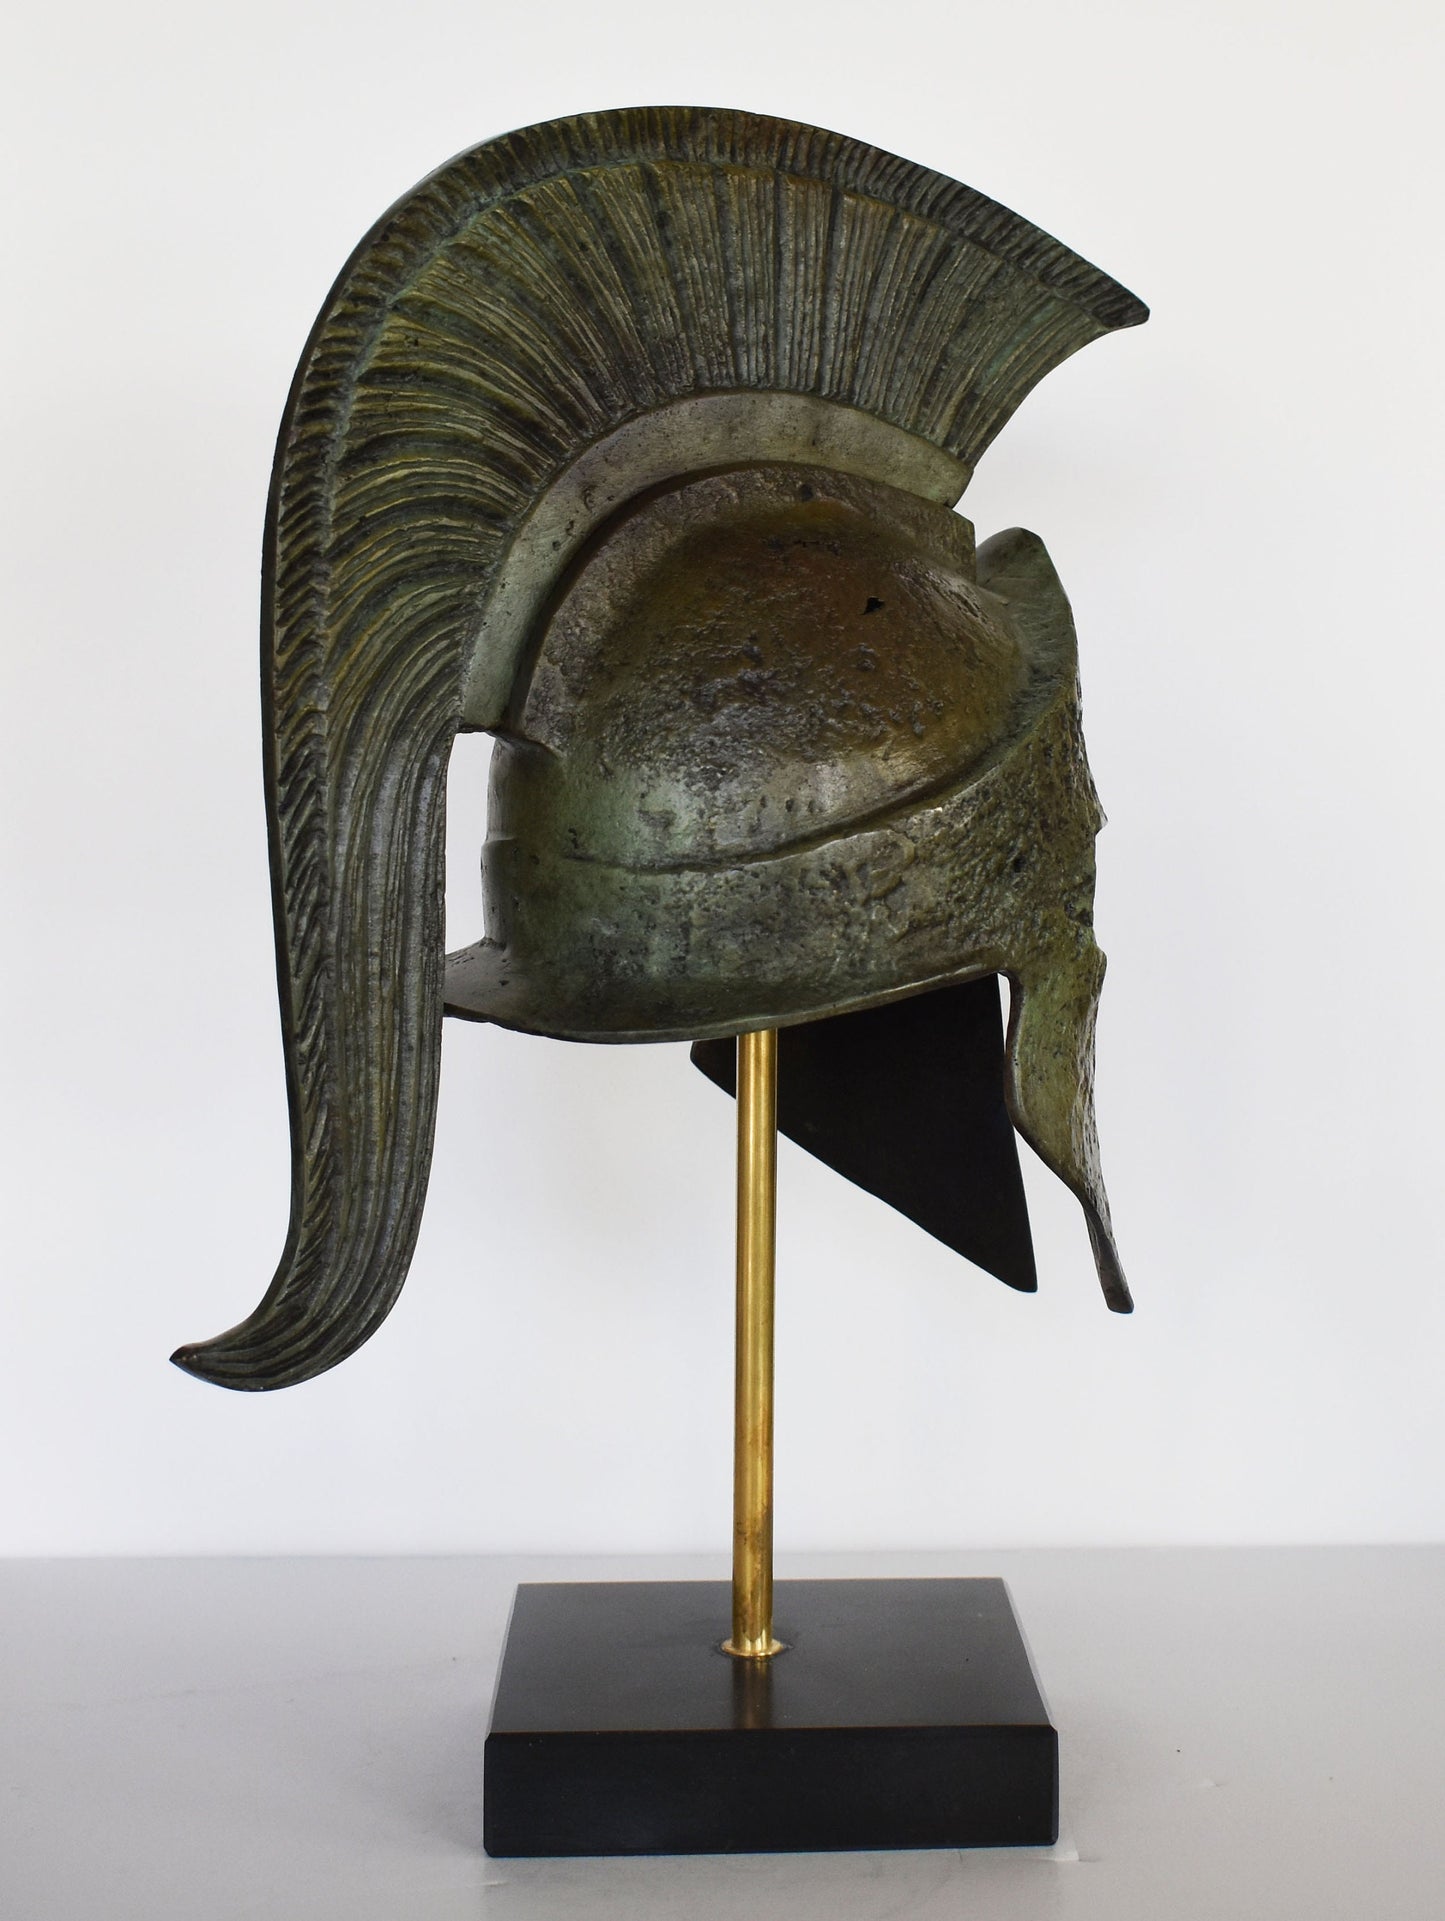 Leonida's Helmet - Spartan king - Battle of Thermopylae - 480 BC - 300 Spartans  - Marble Base - Pure Bronze  Statue